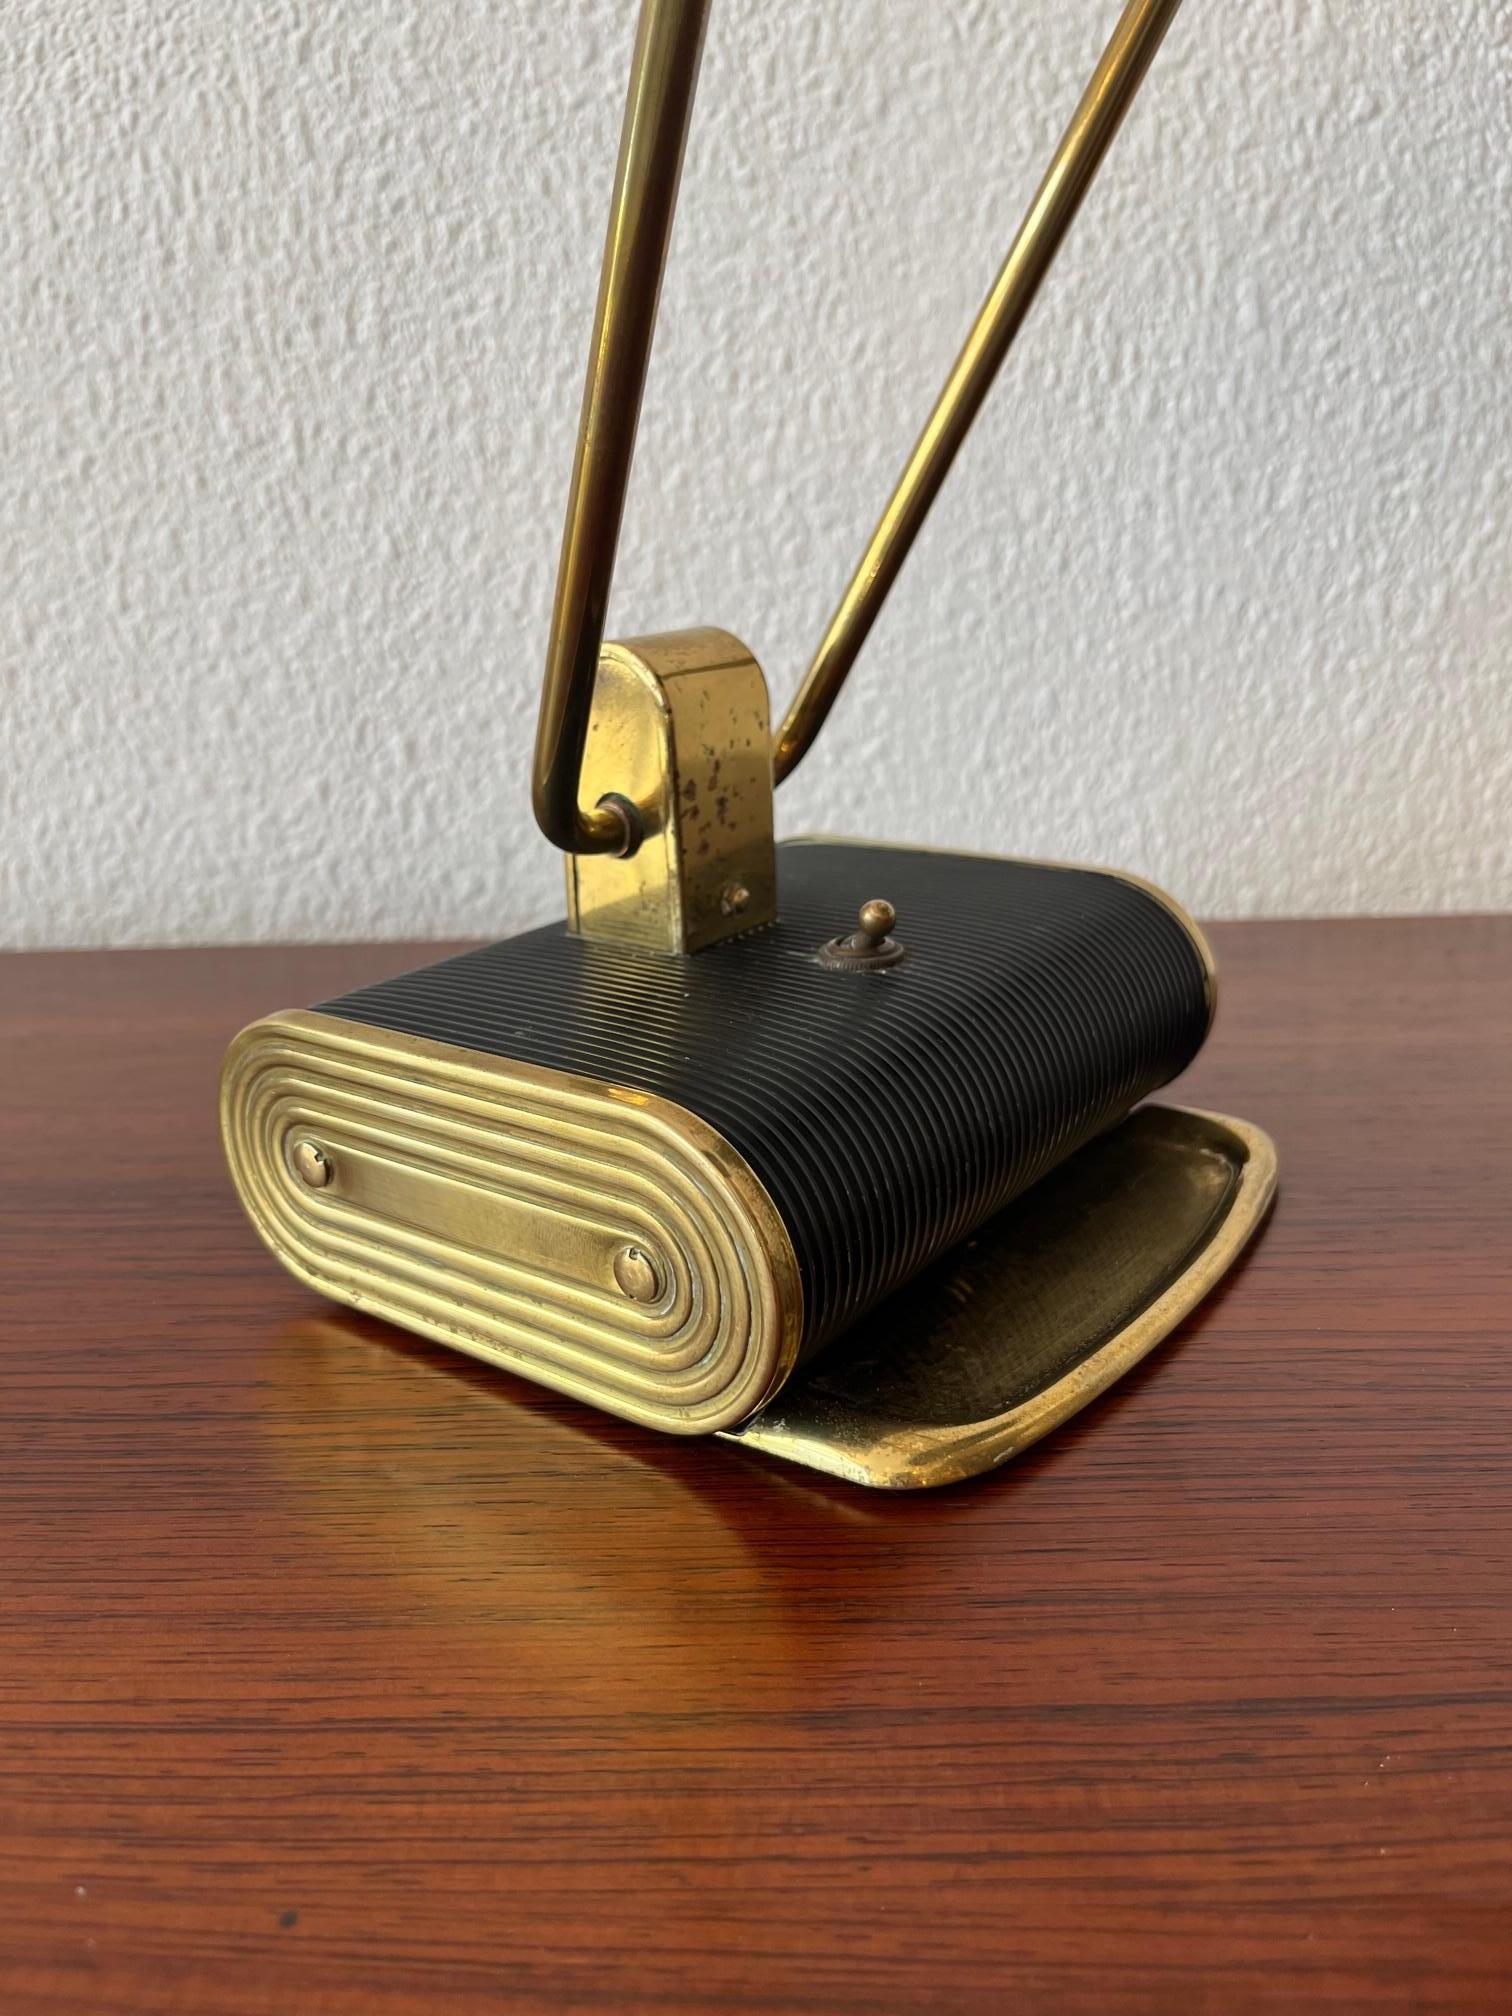 Brass & Aluminum Adjustable Desk Lamp by Eileen Gray for Jumo, France ca. 1940s For Sale 1